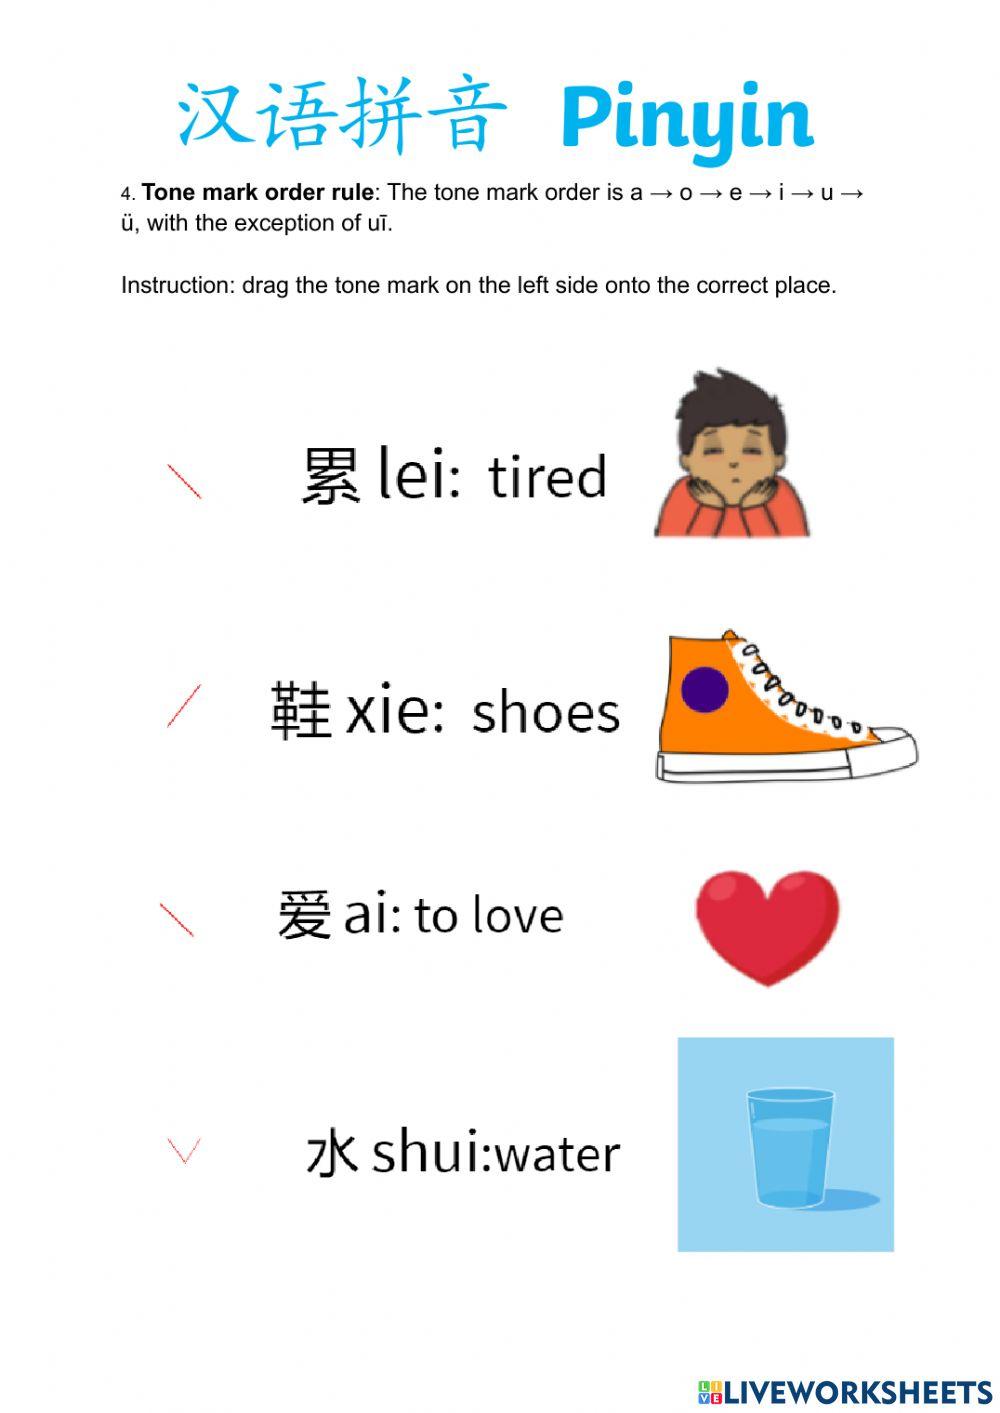 Pinyin special rules